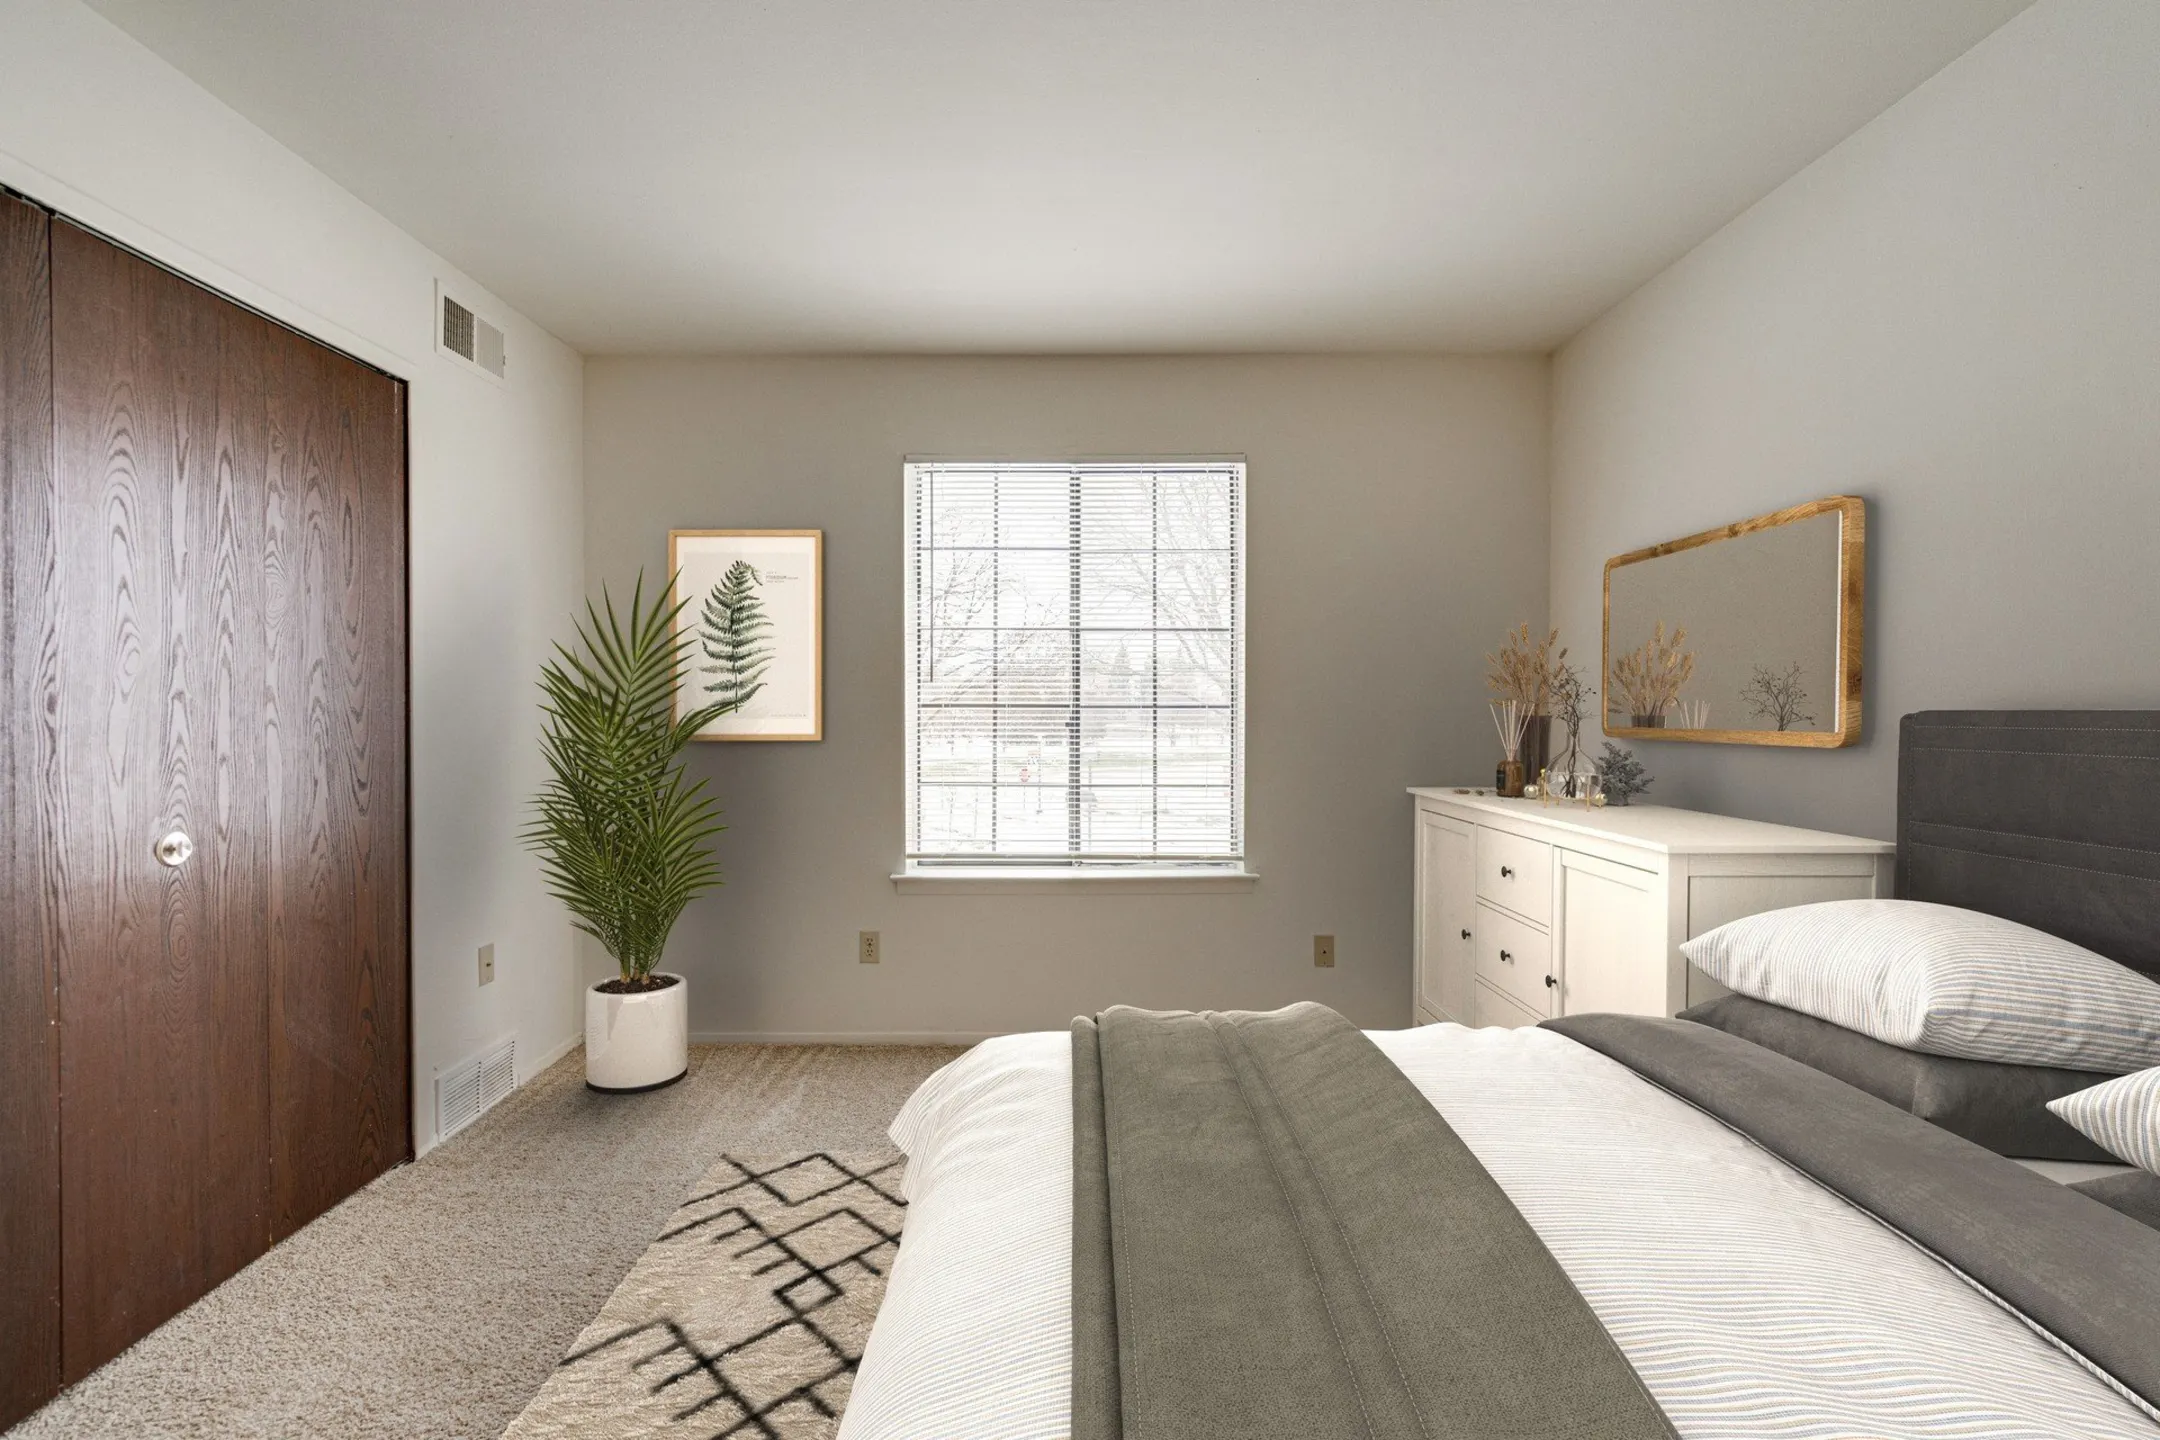 Bedroom - Fox Pointe Apartments - East Moline, IL